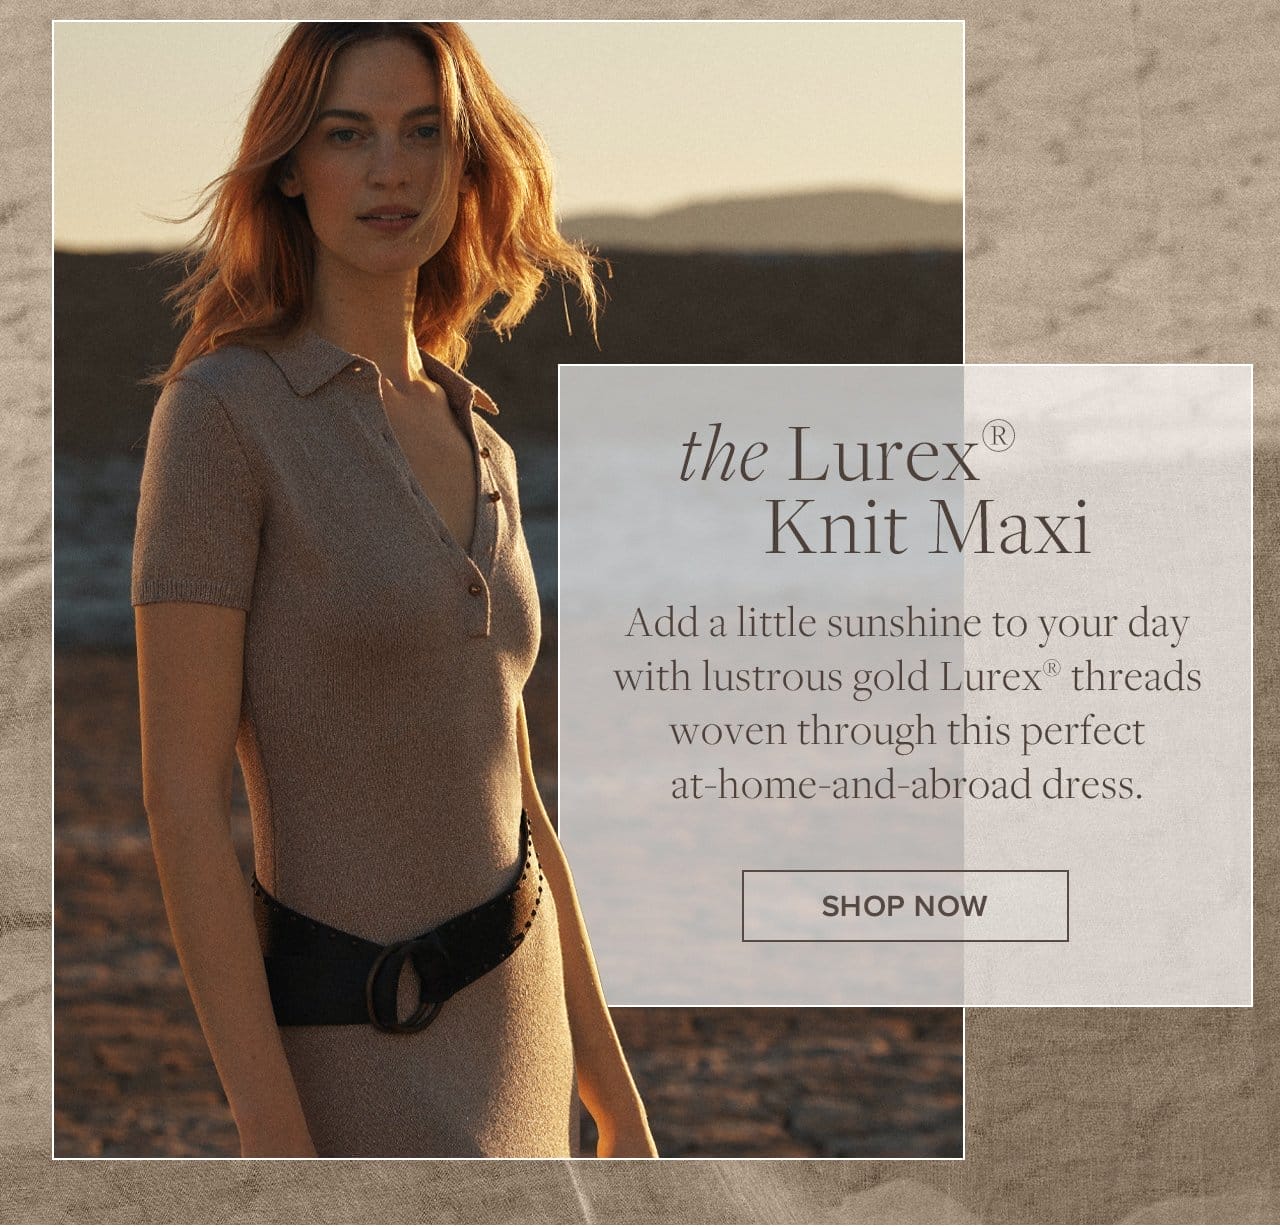 the Lurex Knit Maxi Add a little sunshine to your day with lustrous gold Lurex threads woven through this perfect at-home-and-abroad dress. Shop Now